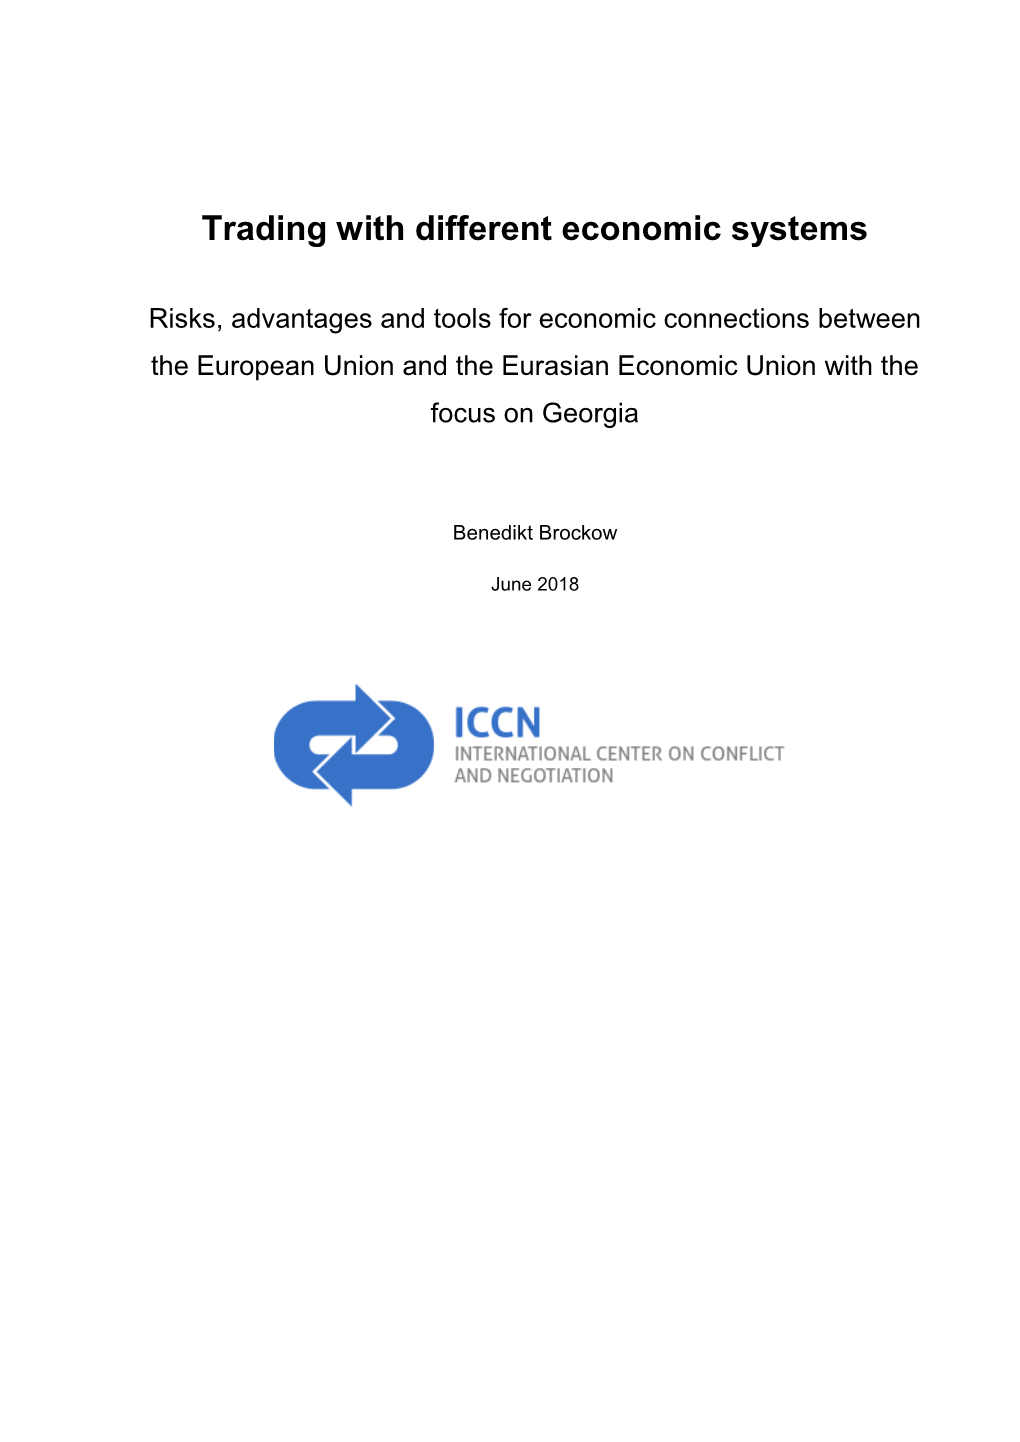 Trading with Different Economic Systems